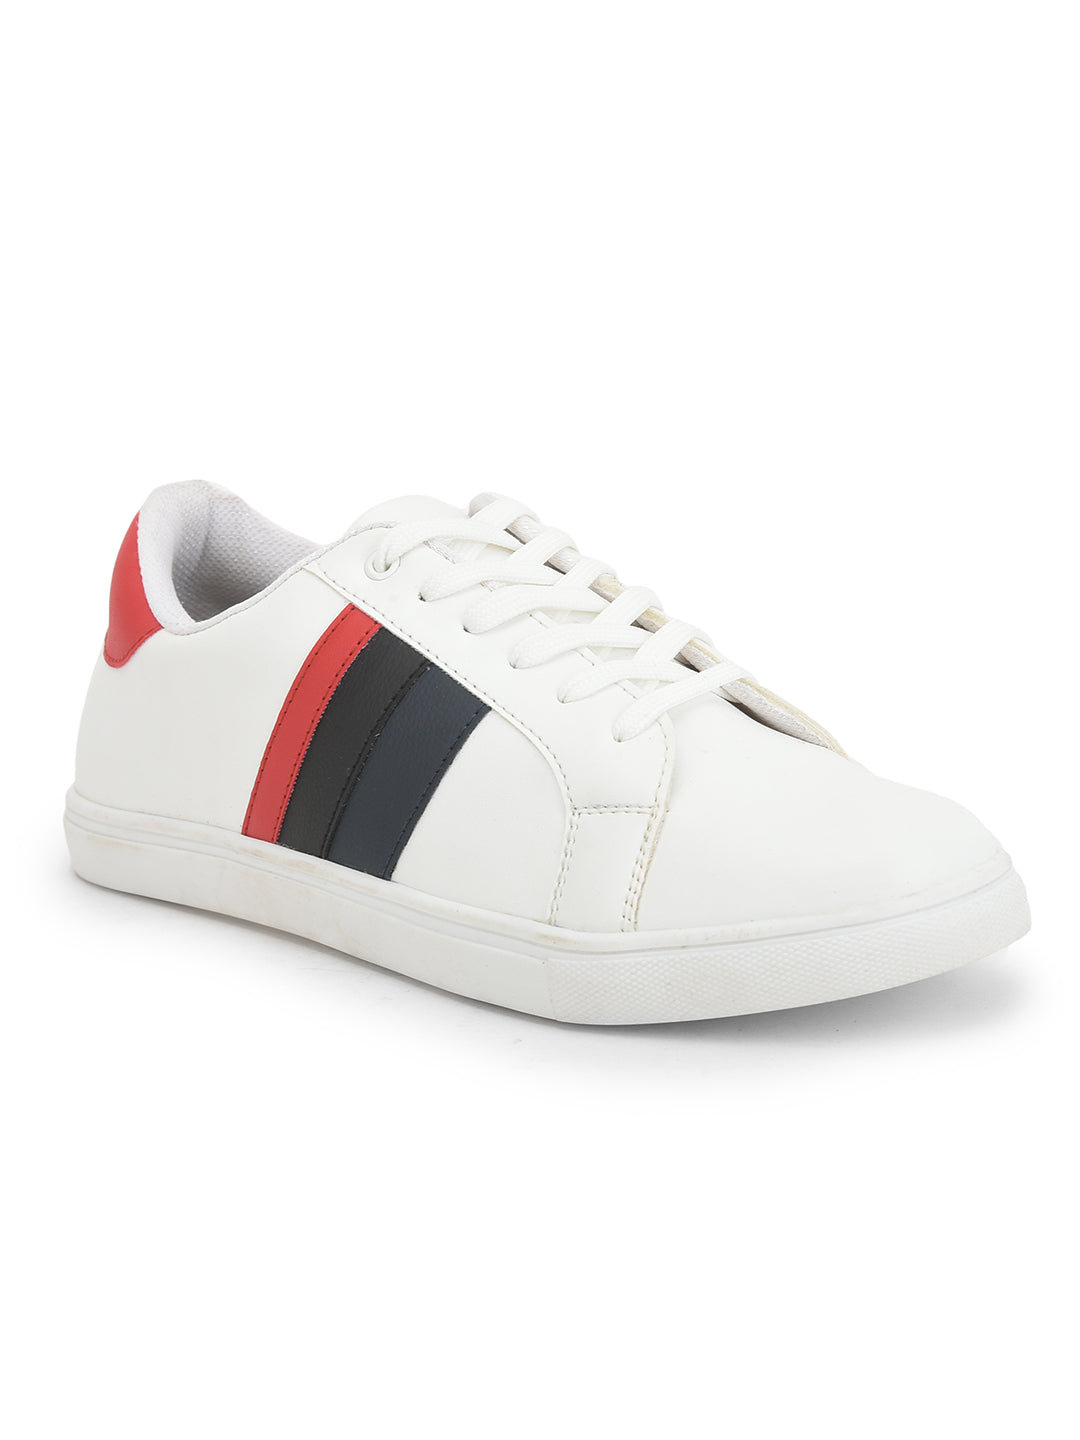 Cobb Mens White Sneakers Shoes